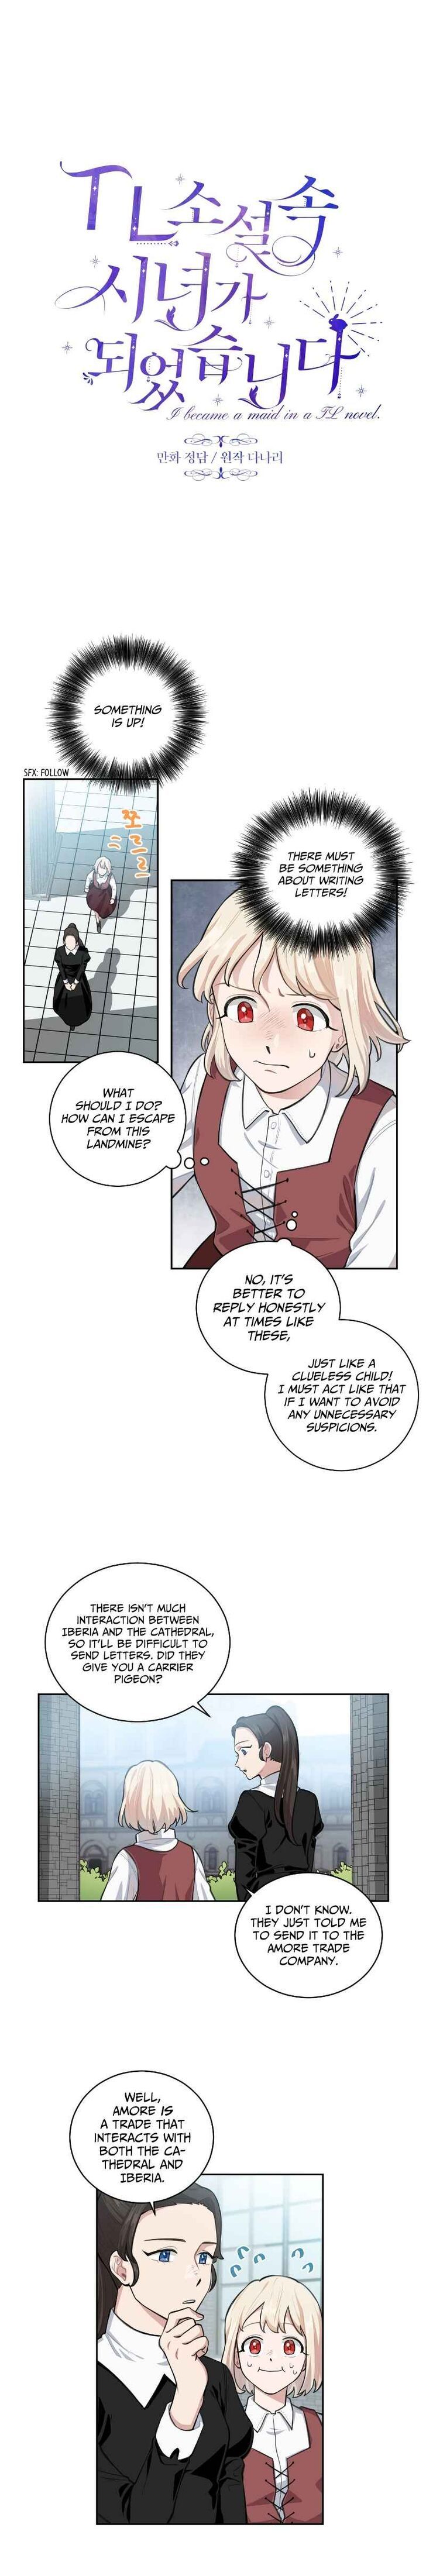 I Became a Maid in a TL Novel Chapter 002 page 5